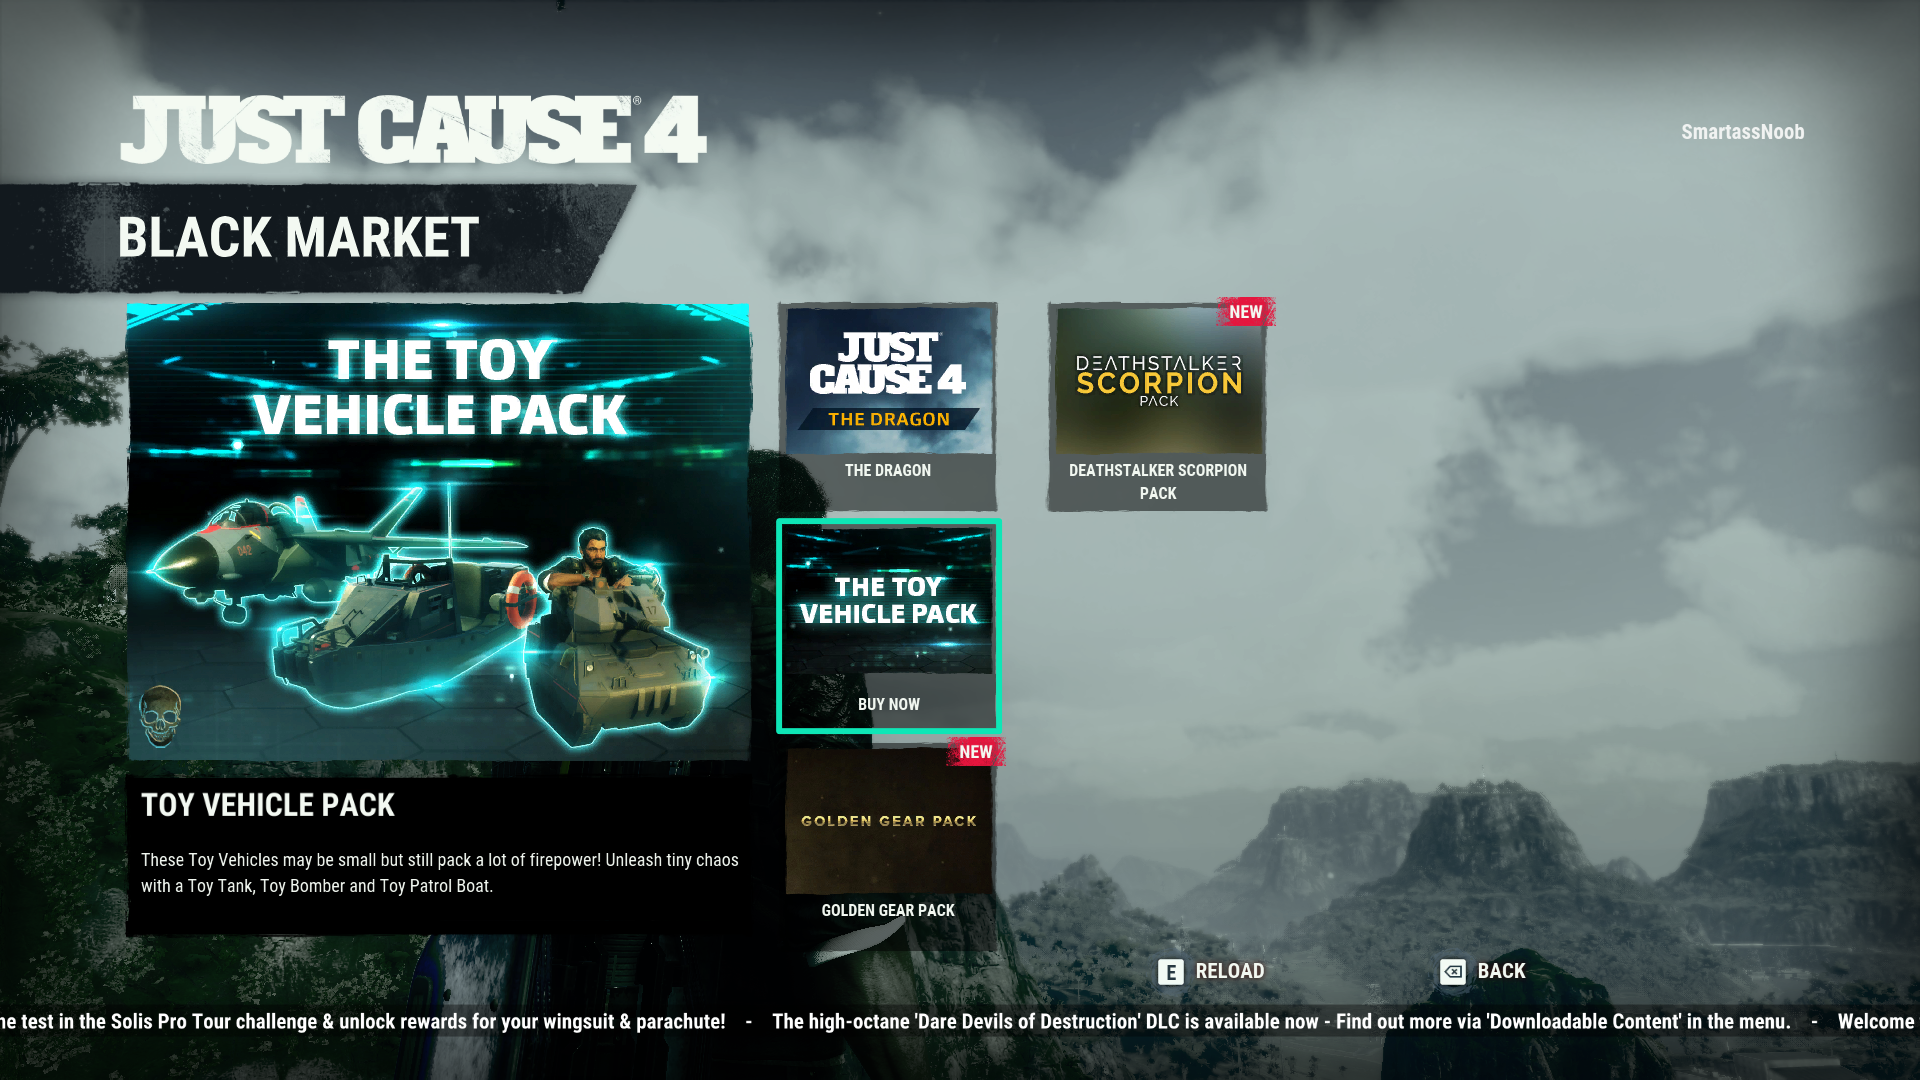 just cause 2 dlcs